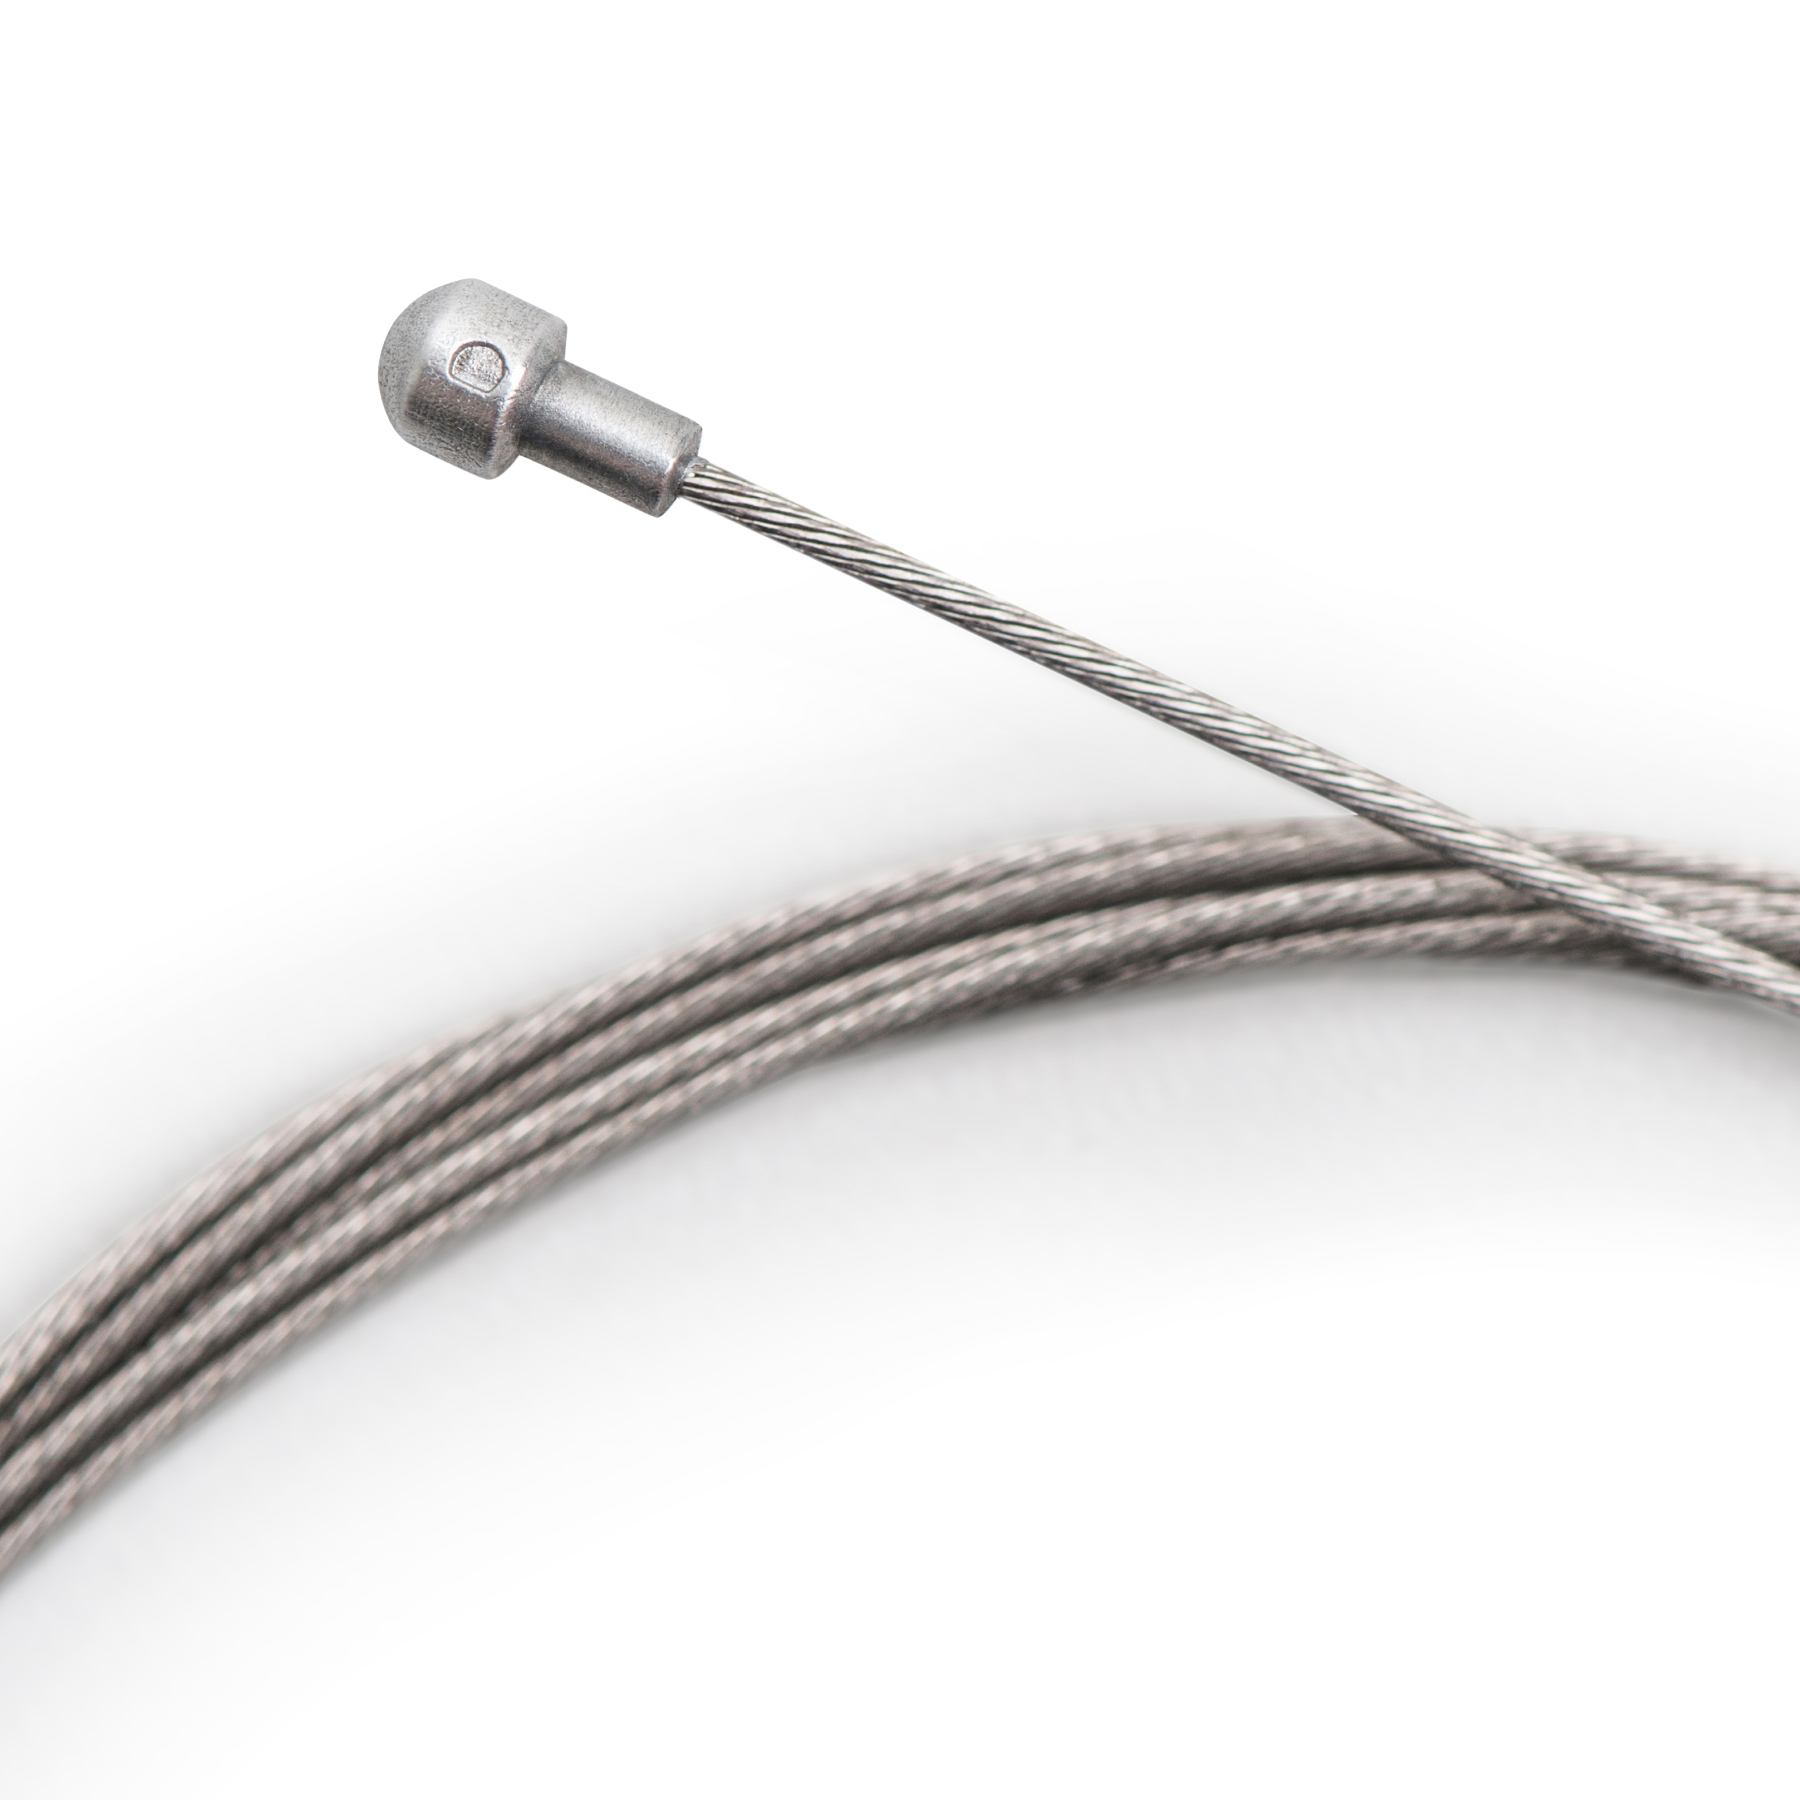 Picture of capgo Orange Line Brake Cable - 1.5 mm - Stainless Steel / Slick - 2000 mm - Shimano Road